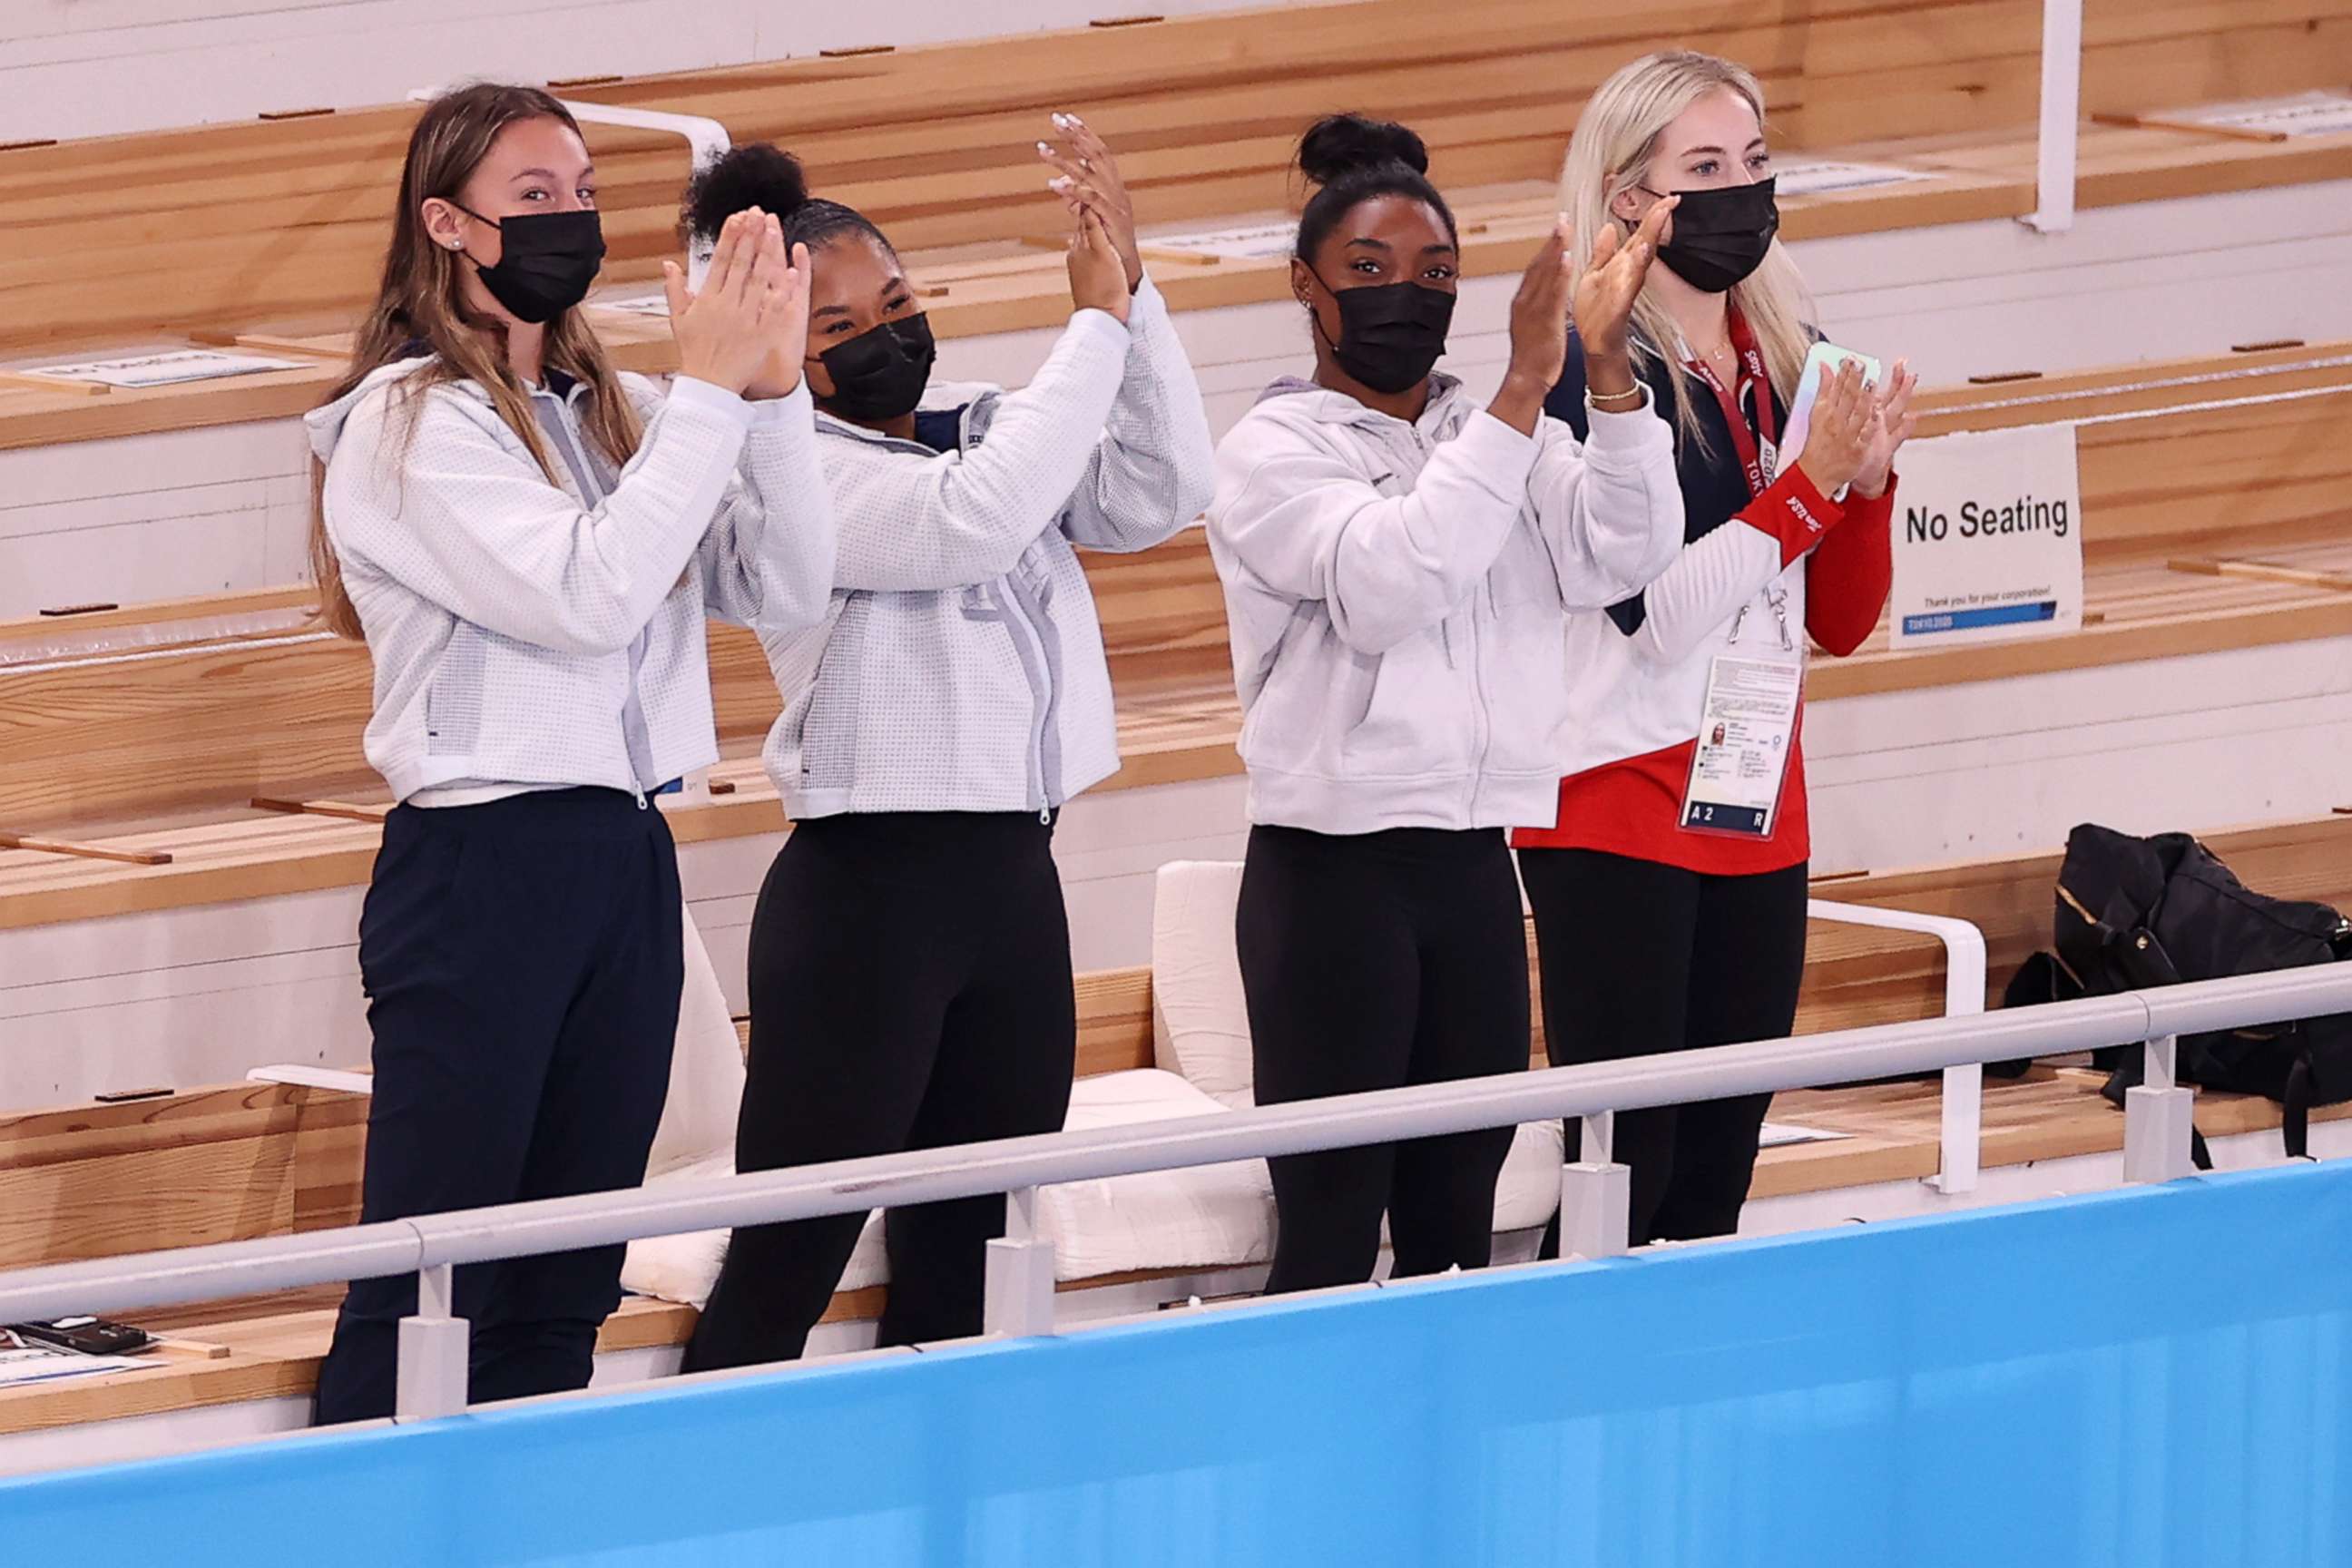 PHOTO: TOKYO, JAPAN - JULY 29: (L-R) Riley McCusker, Jordan Chiles, Simone Biles, and Mykayla Skinner of Team United States,cheer after Sunisa Lee won the gold medal in the Women's All-Around Final on day six of the Tokyo 2020 Olympic Games.